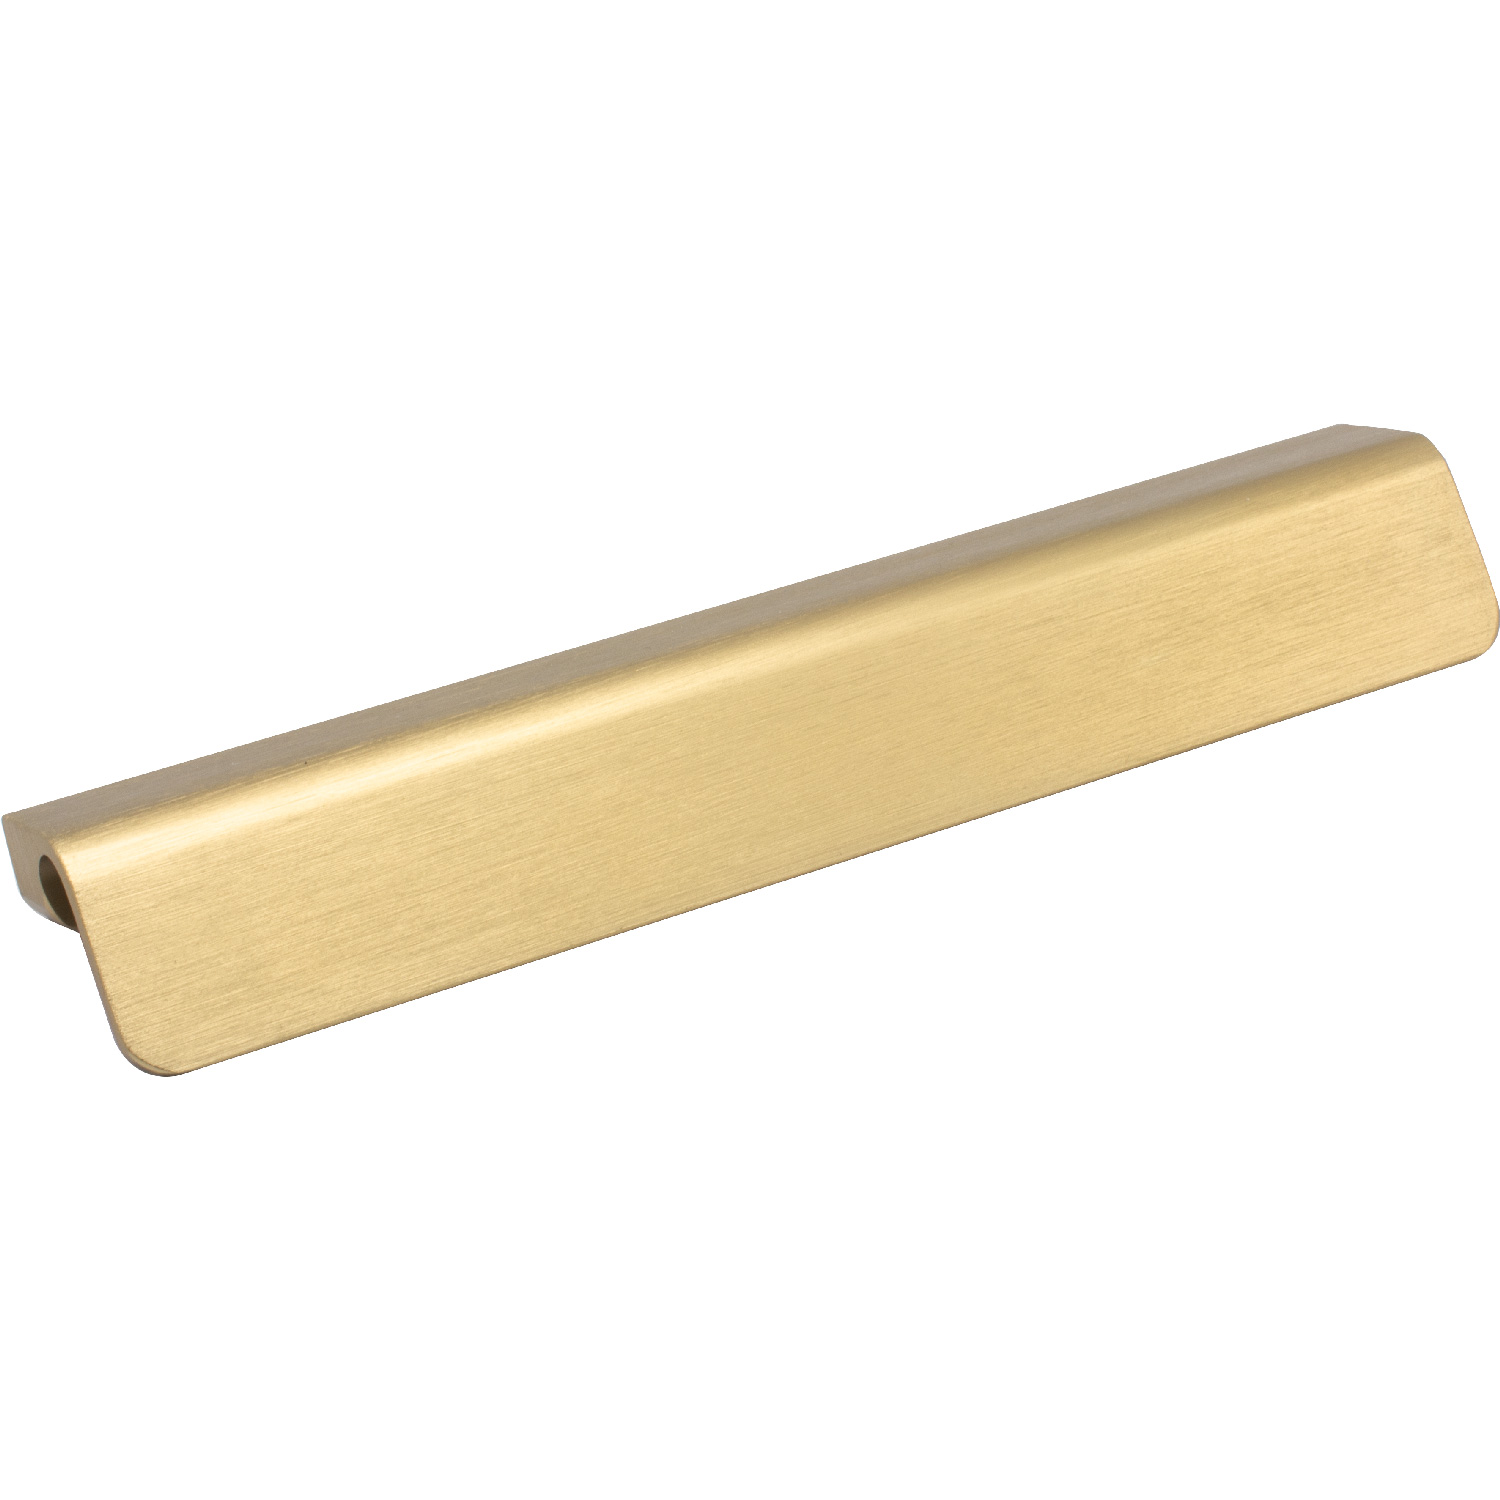 Satin Brass Neal Cabinet Knobs and Pulls Cabinet Hardware